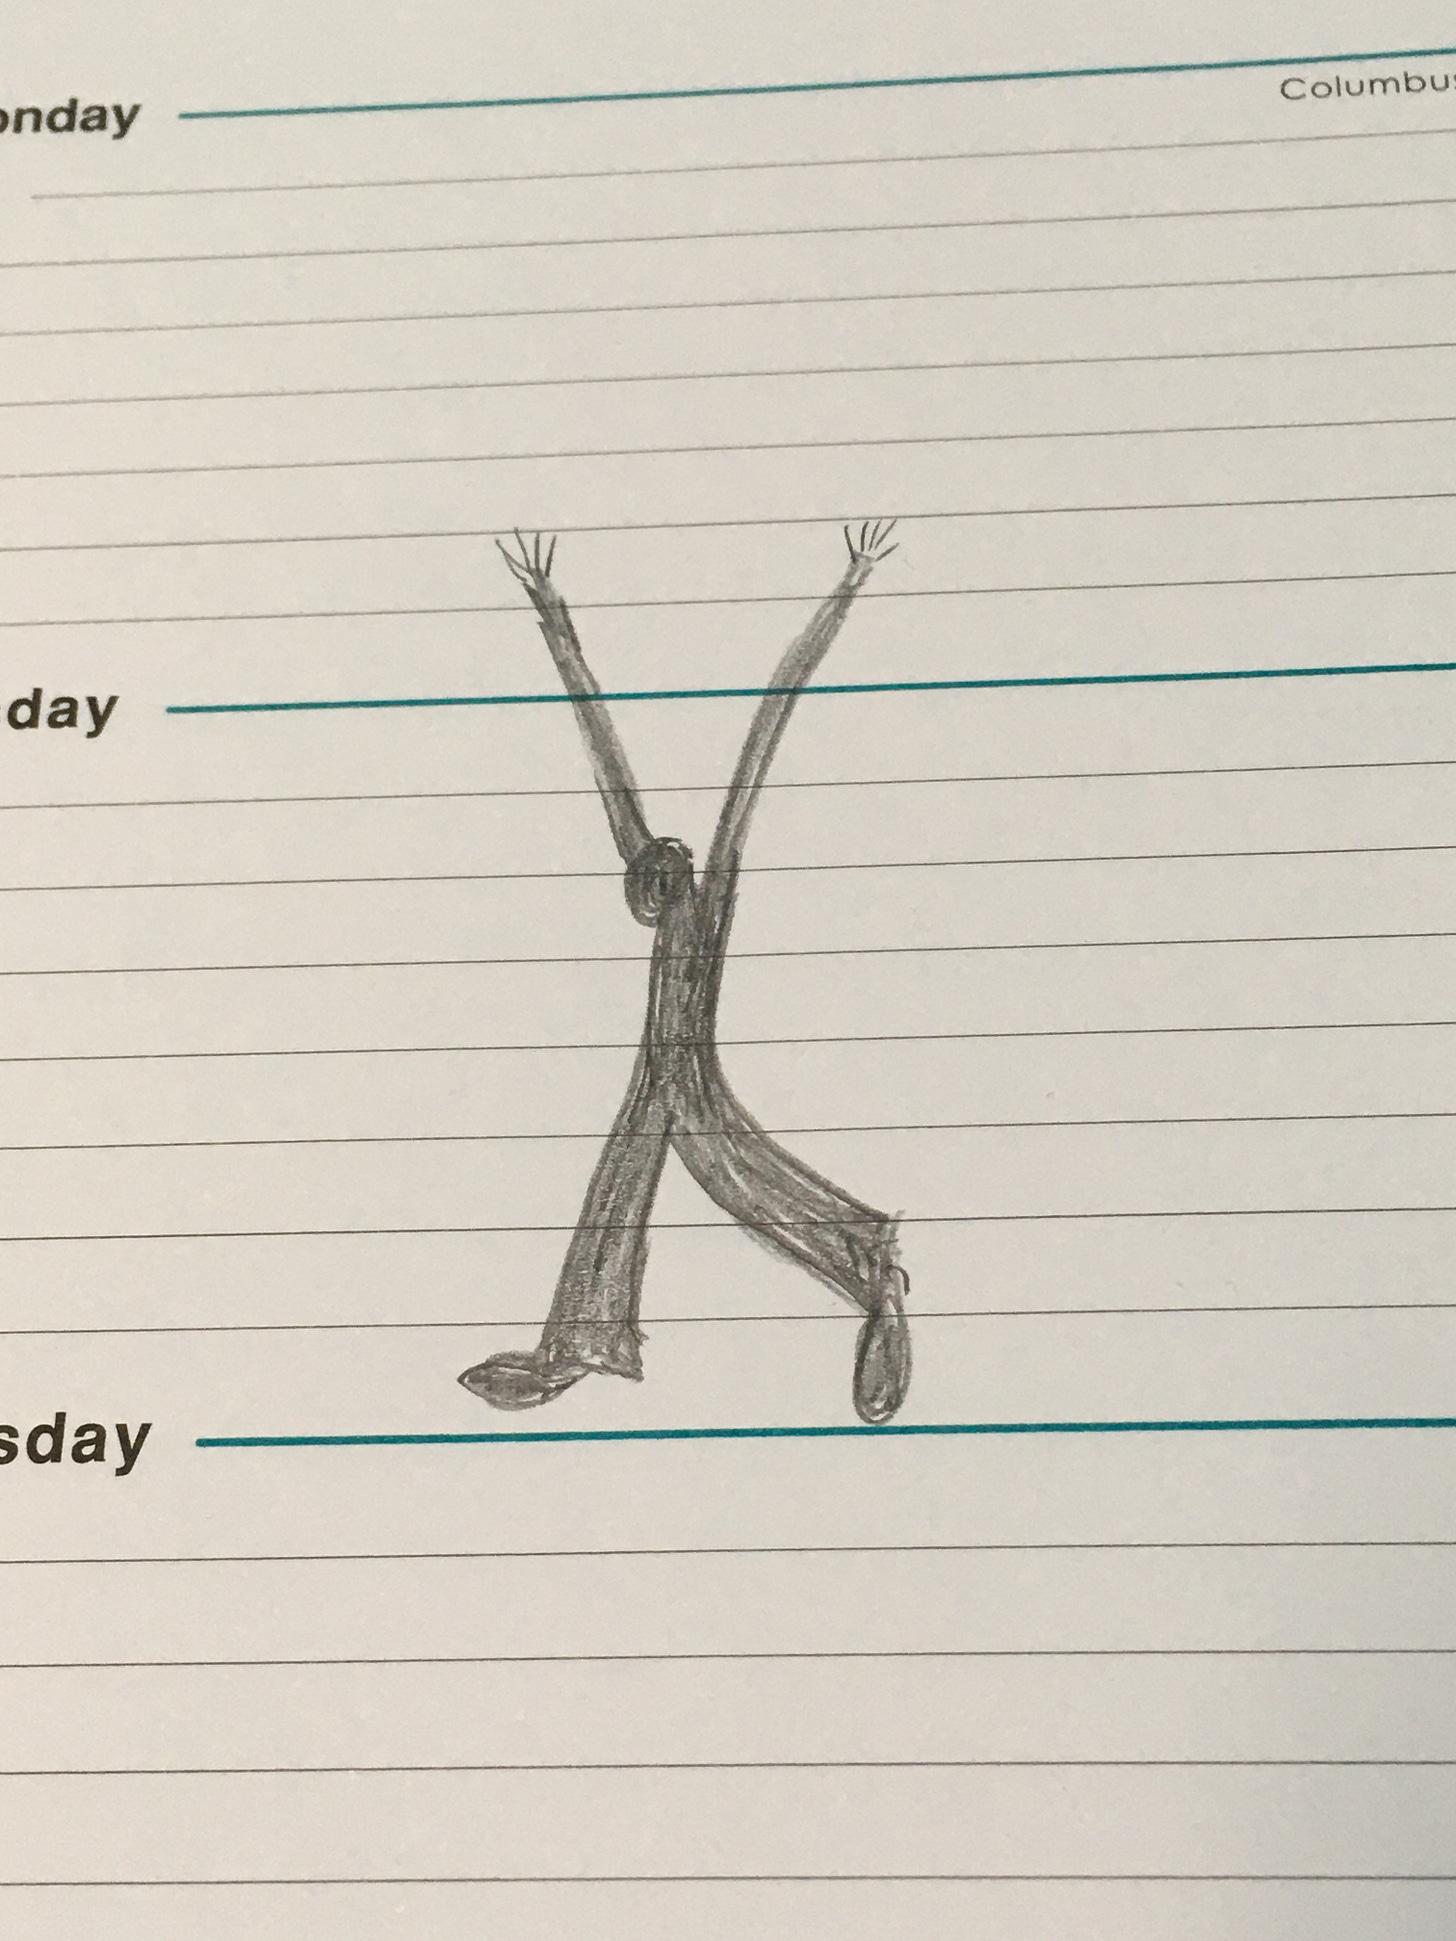 Day Planner, Welcome To Monday. By Gary Geyer. Pencil drawing of figure with arms upraised. Drwing on a page from a day planner.